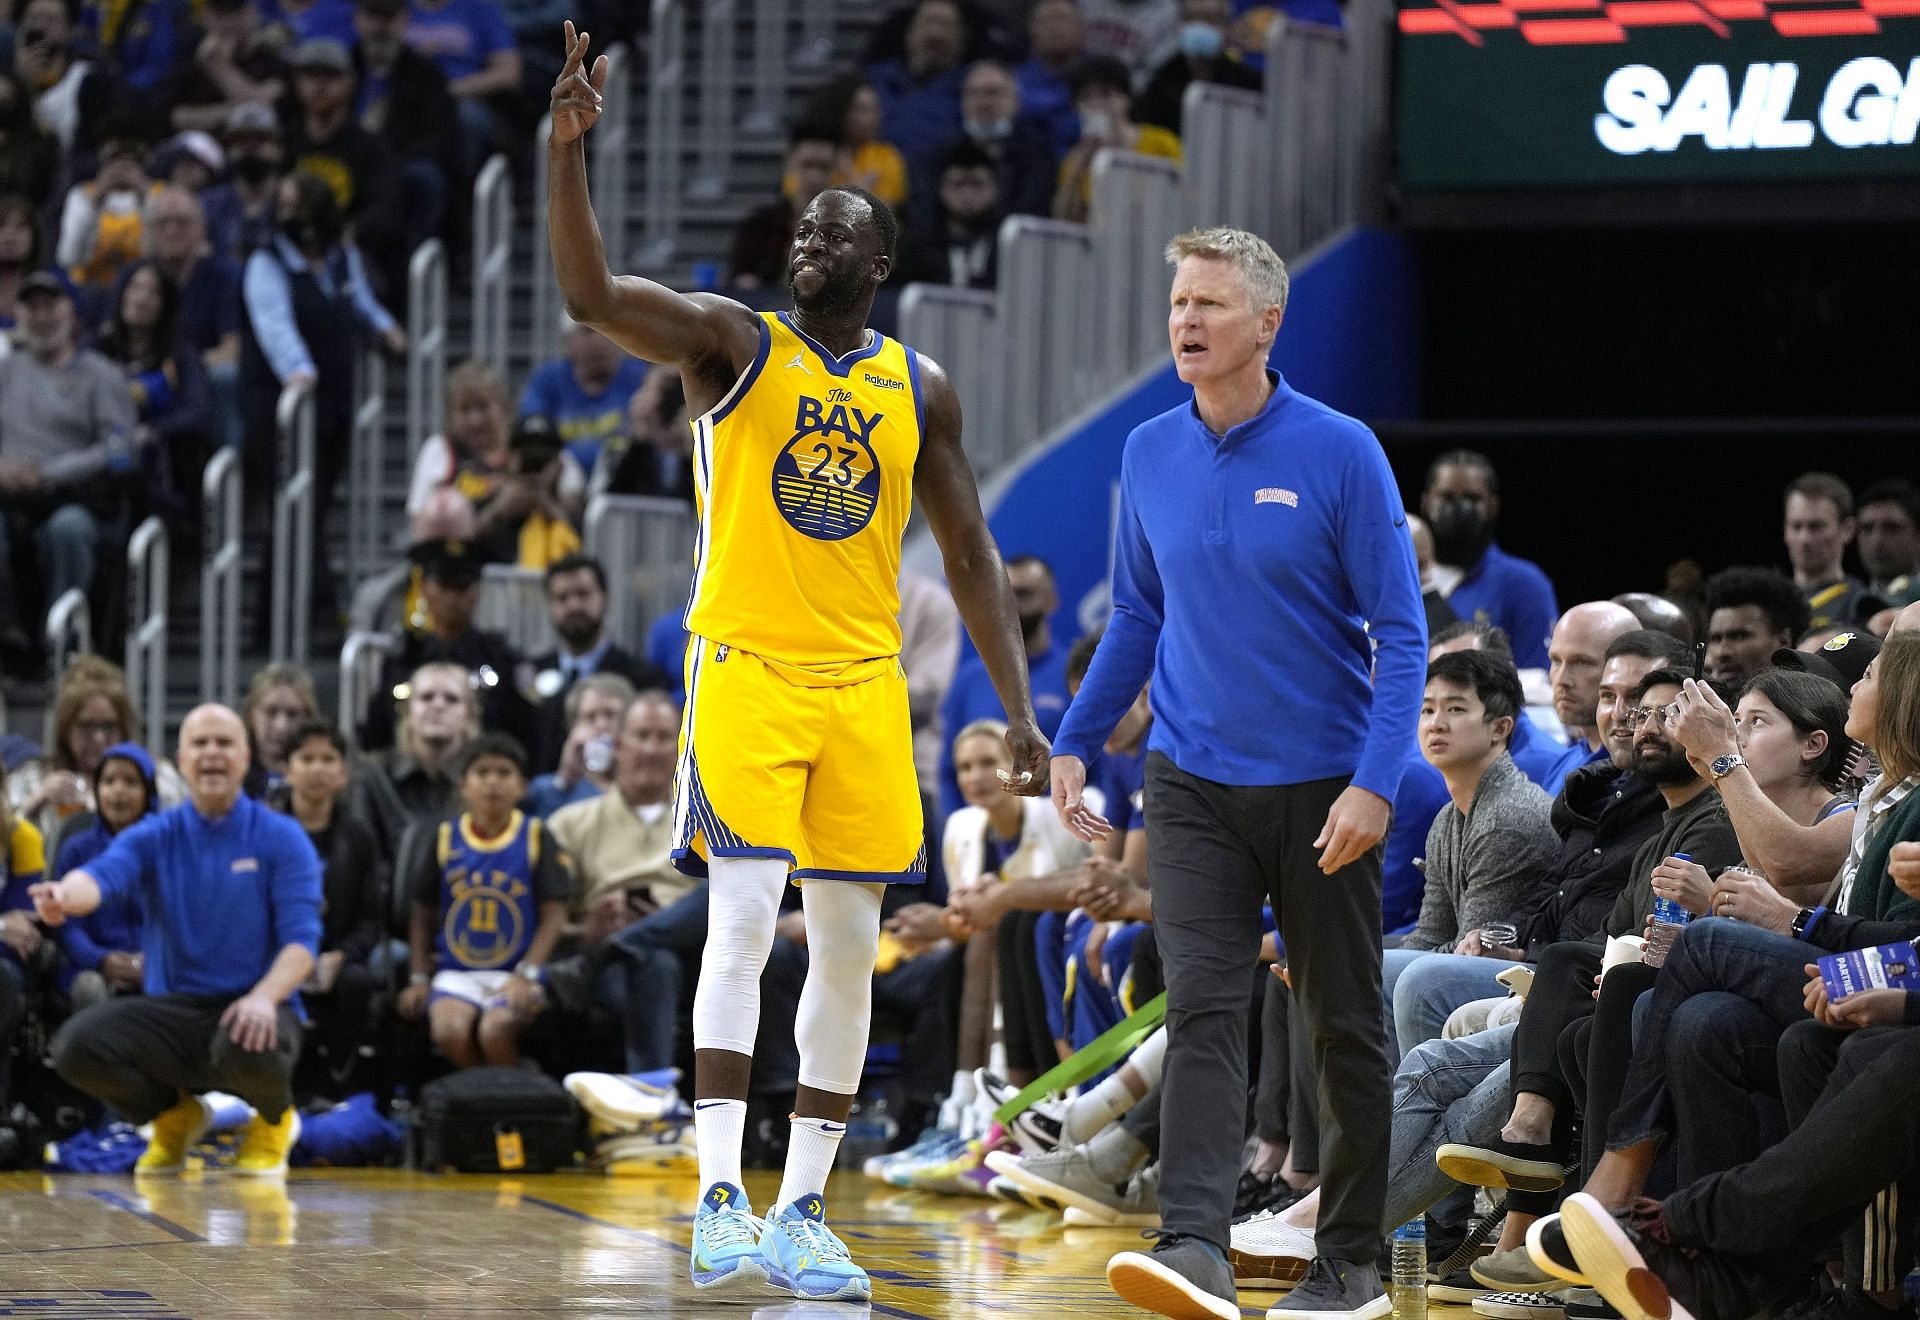 Draymond Green and coach Steve Kerr of the Golden State Warriors react when Green was ejected after receiving his second technical foul against the San Antonio Spurs on March 20 in San Francisco, California.